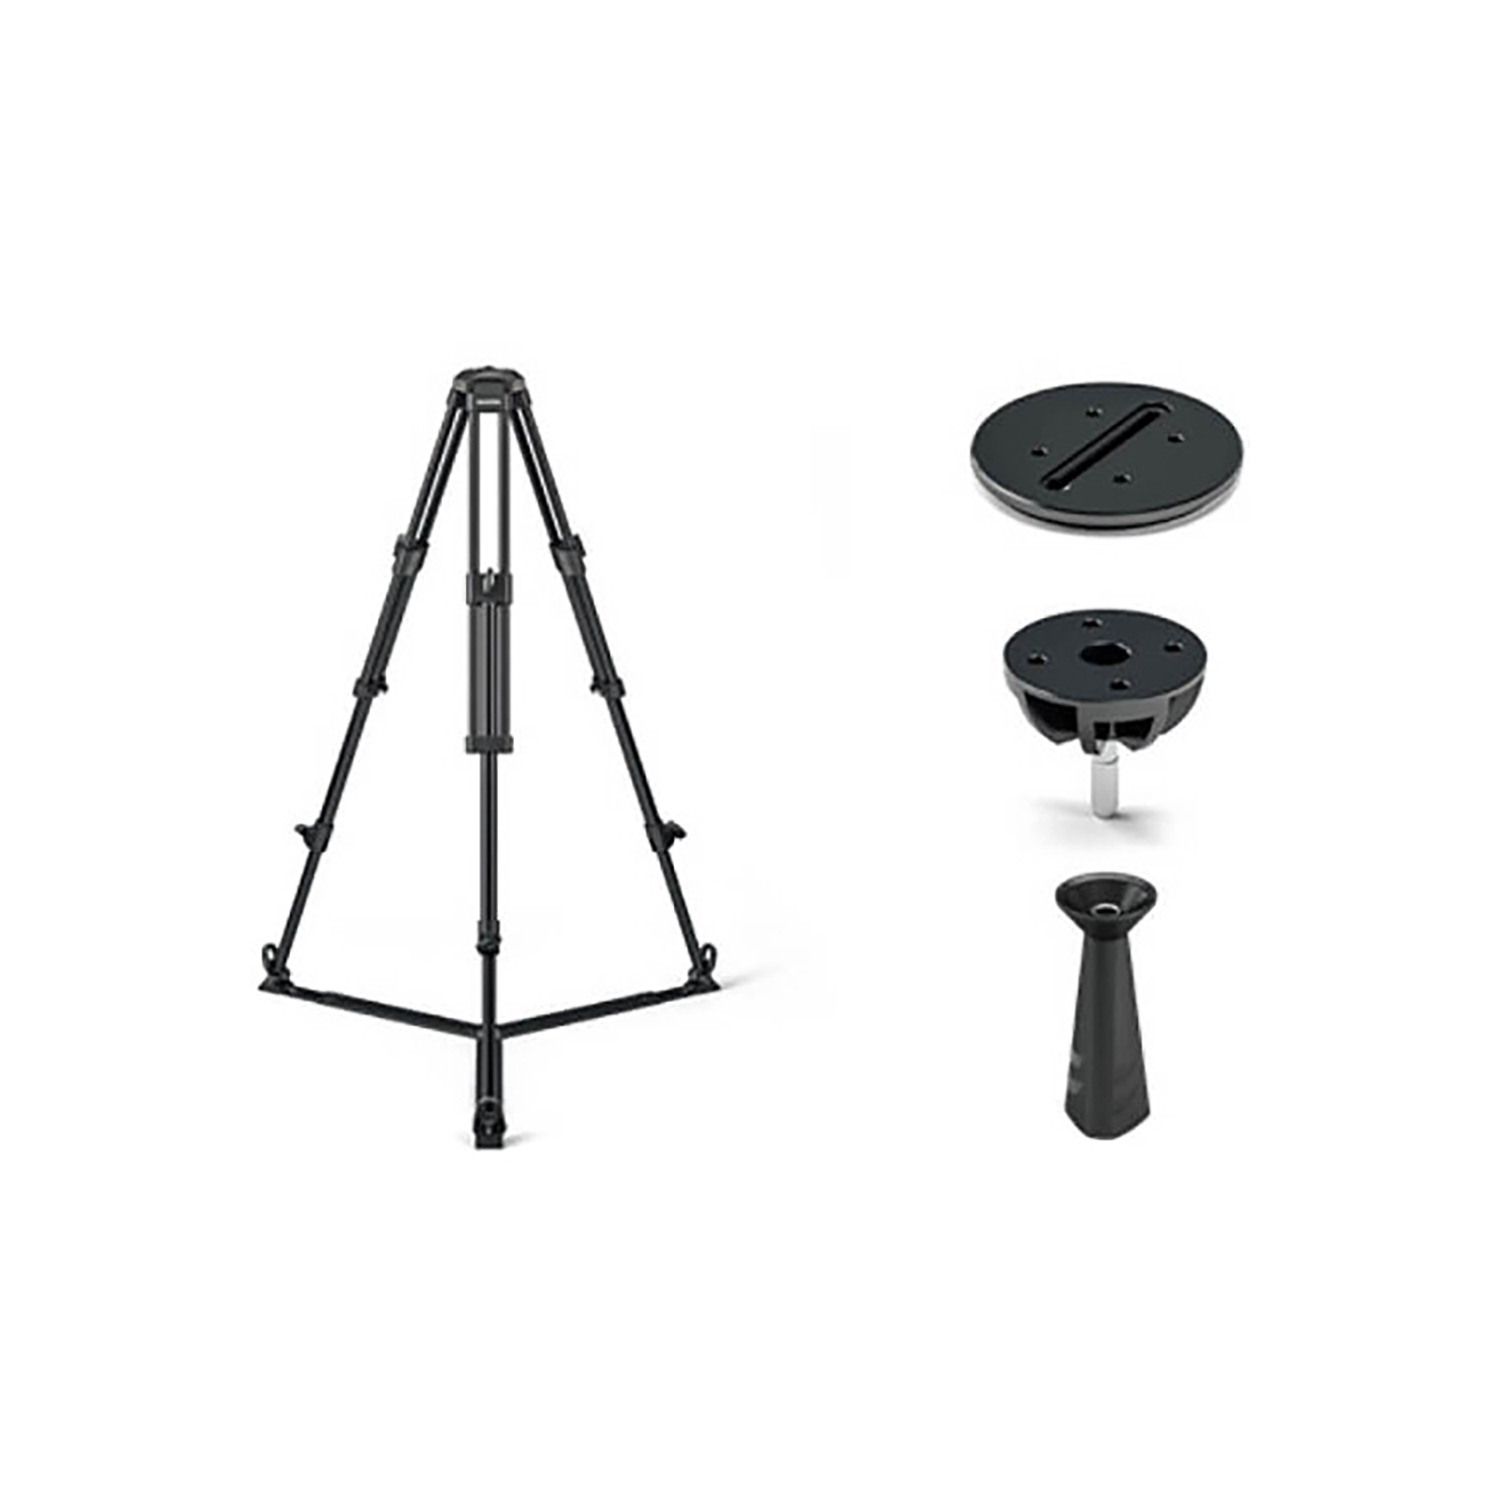 Sachtler PTZ Tripod System with Ground Spreader (26.5 lb Payload)